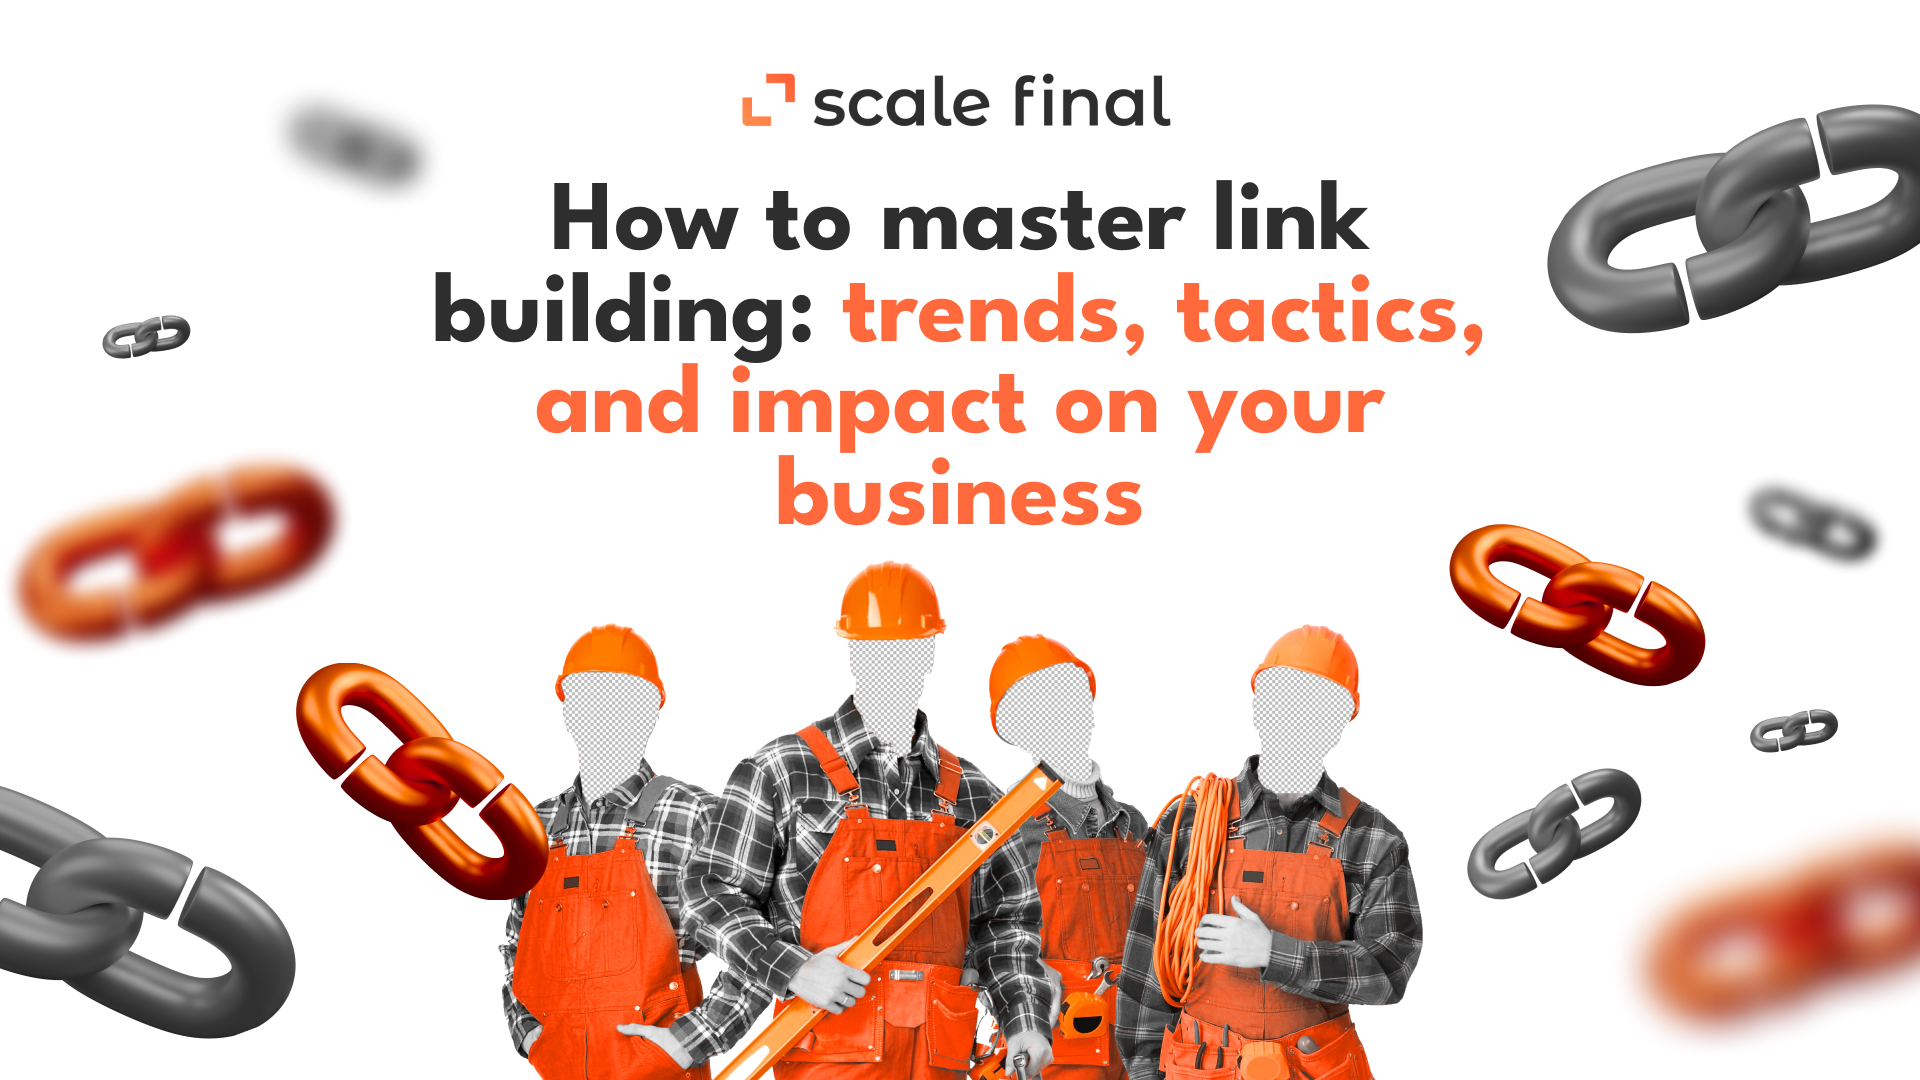 How to master link building: trends, tactics, and impact on your business